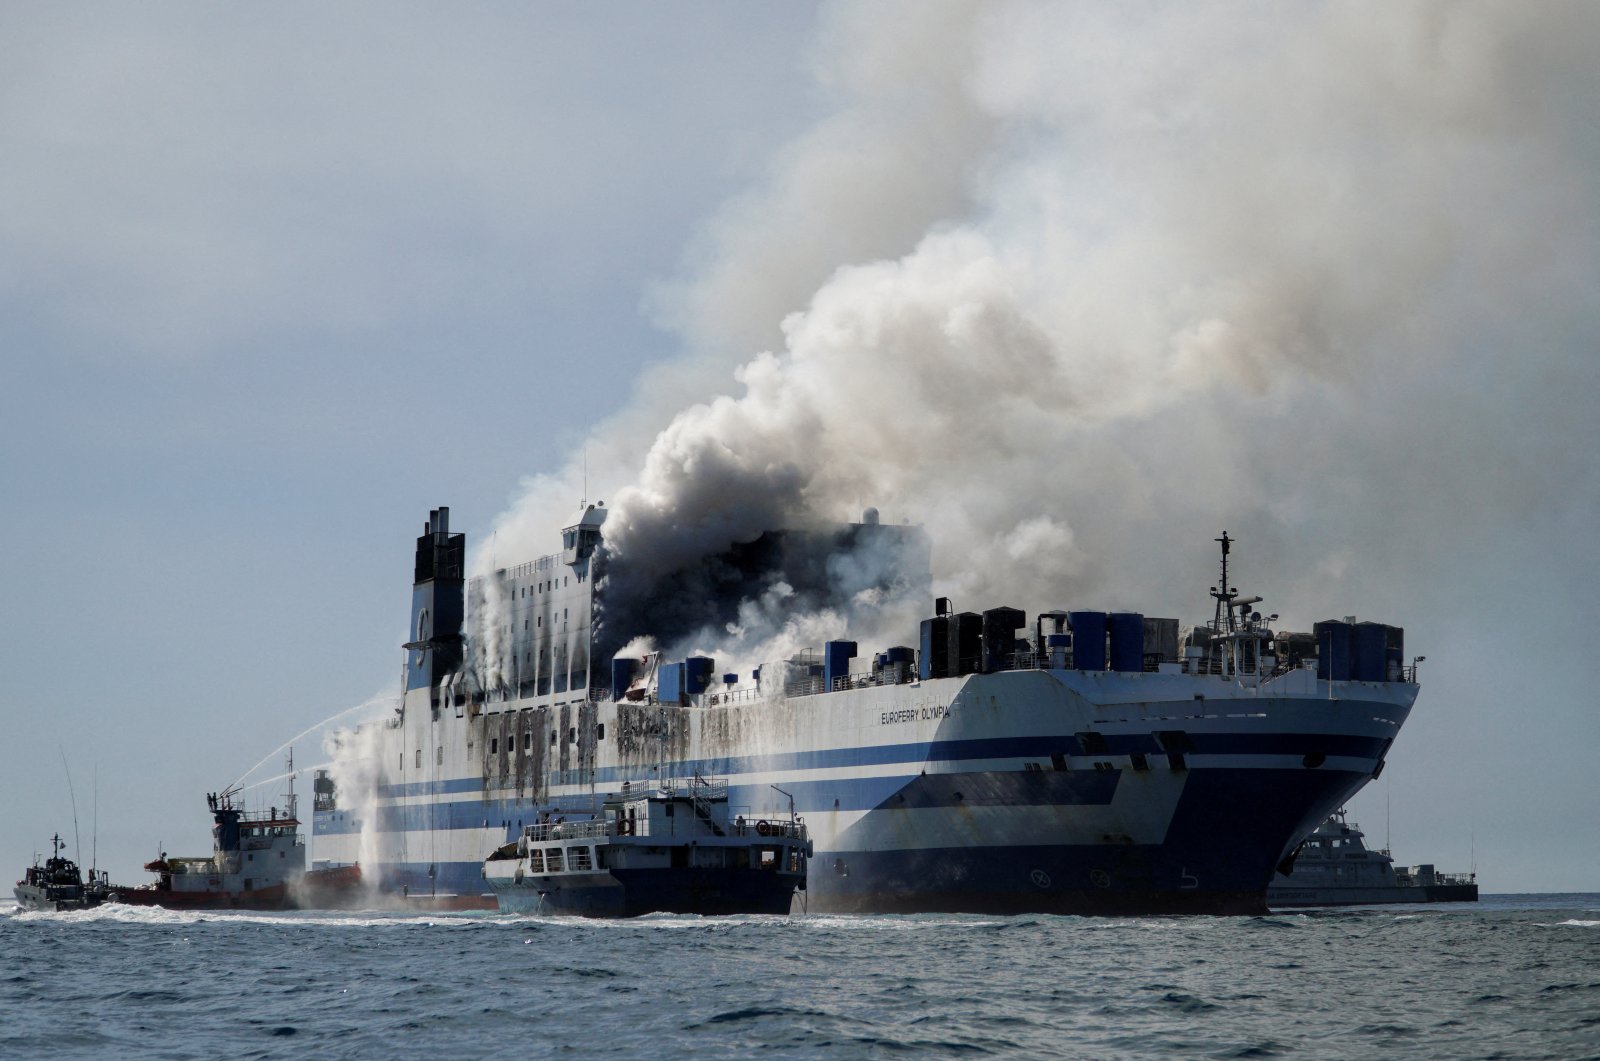 Smoke rises from the burning Italian-flagged Euroferry Olympia after a fire broke out on the ferry, off the island of Corfu, Greece, Feb. 18, 2022. (Reuters Photo)